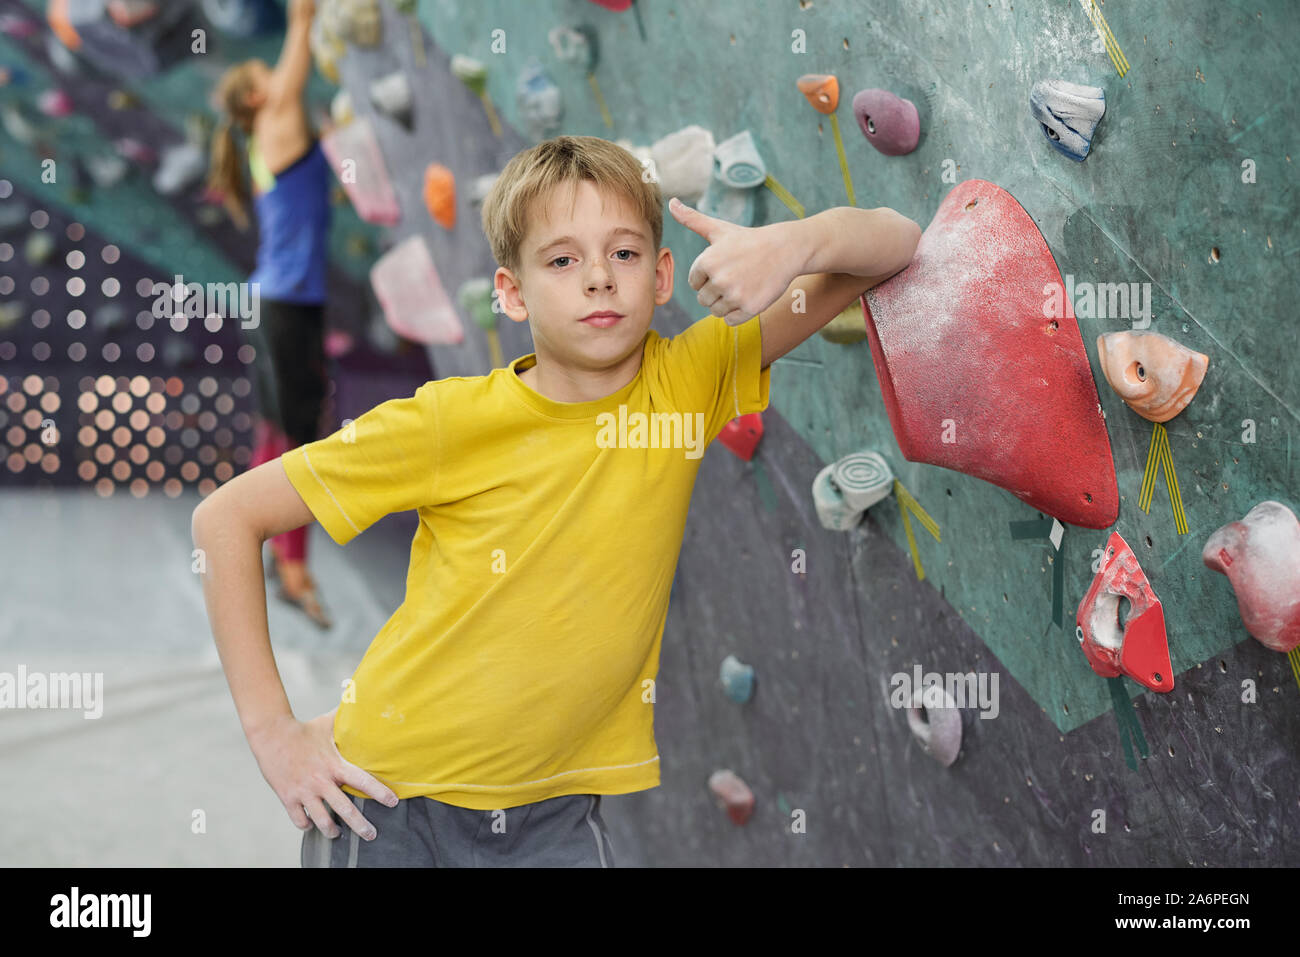 Cute boy showing thumb up while leaning by rock climbing equipment Stock Photo